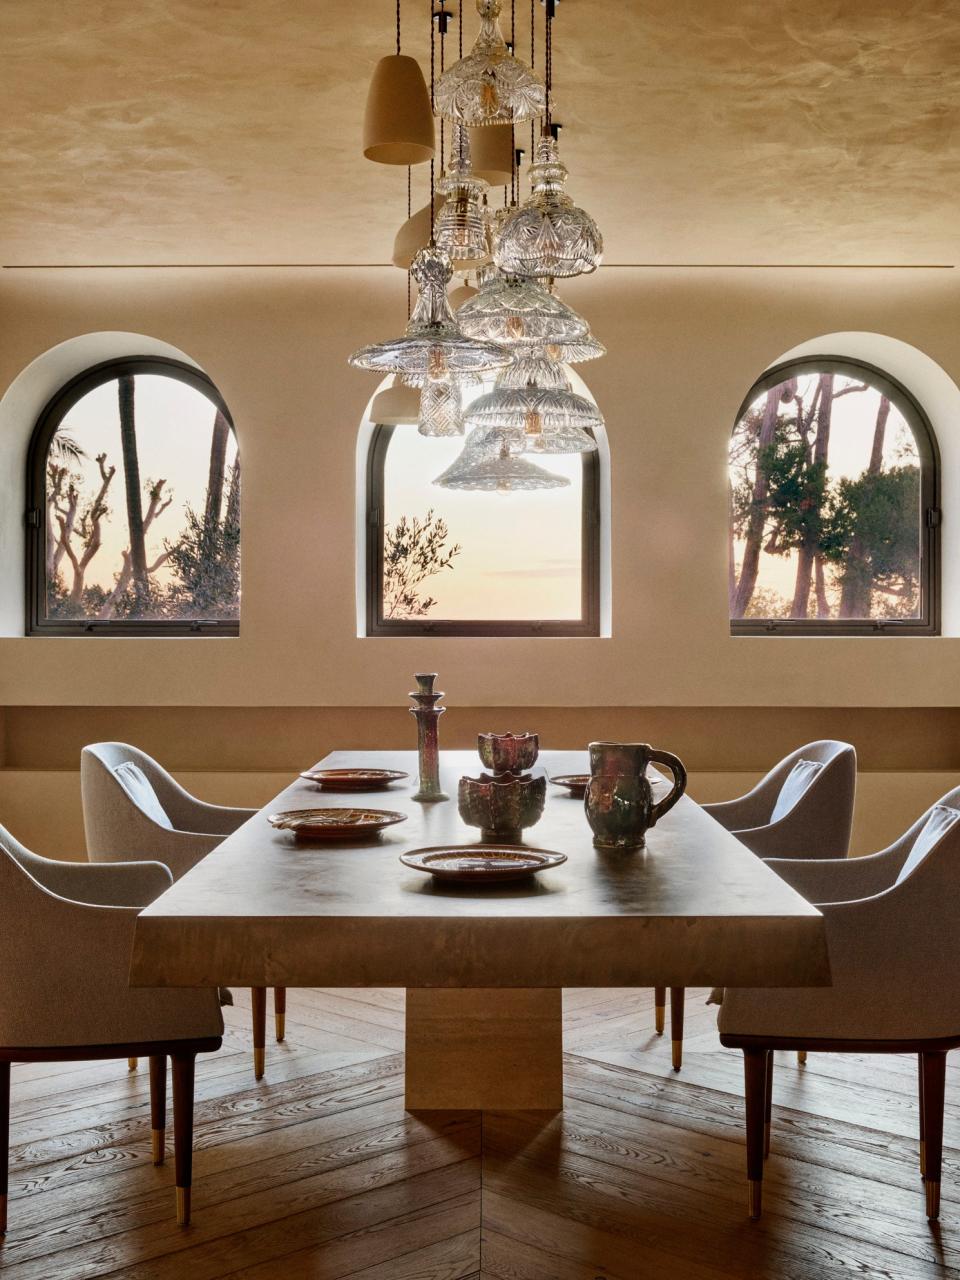 In the dining room, the large ceiling suspension is a unique piece by Les Penates. The ceramic plates are by Nicola Fasano of Fasano Ceramiche while the vintage ceramic jugs and candlestick are from Morocco.